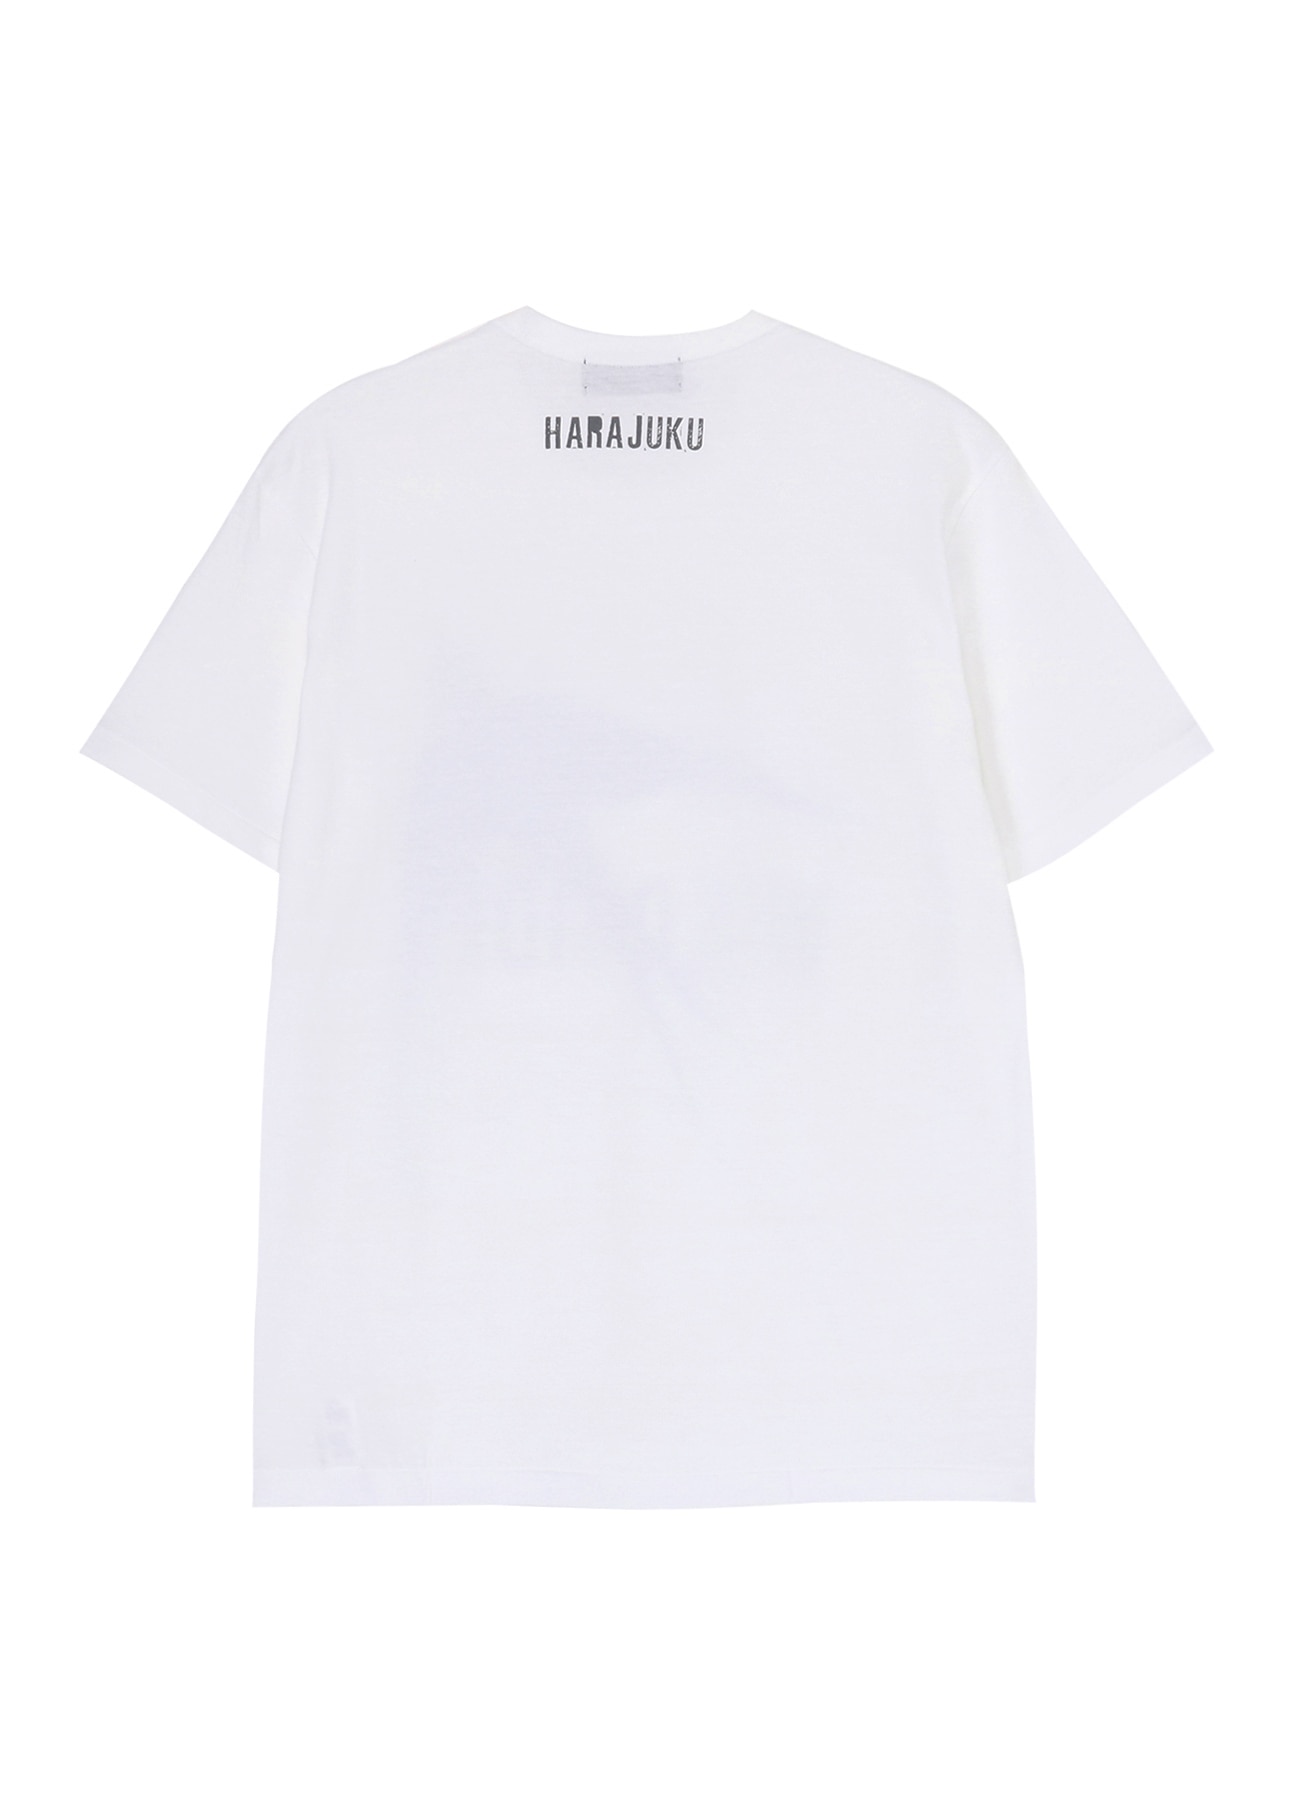 【6/26 12:00(JST) Release】CROW White T-Shirt